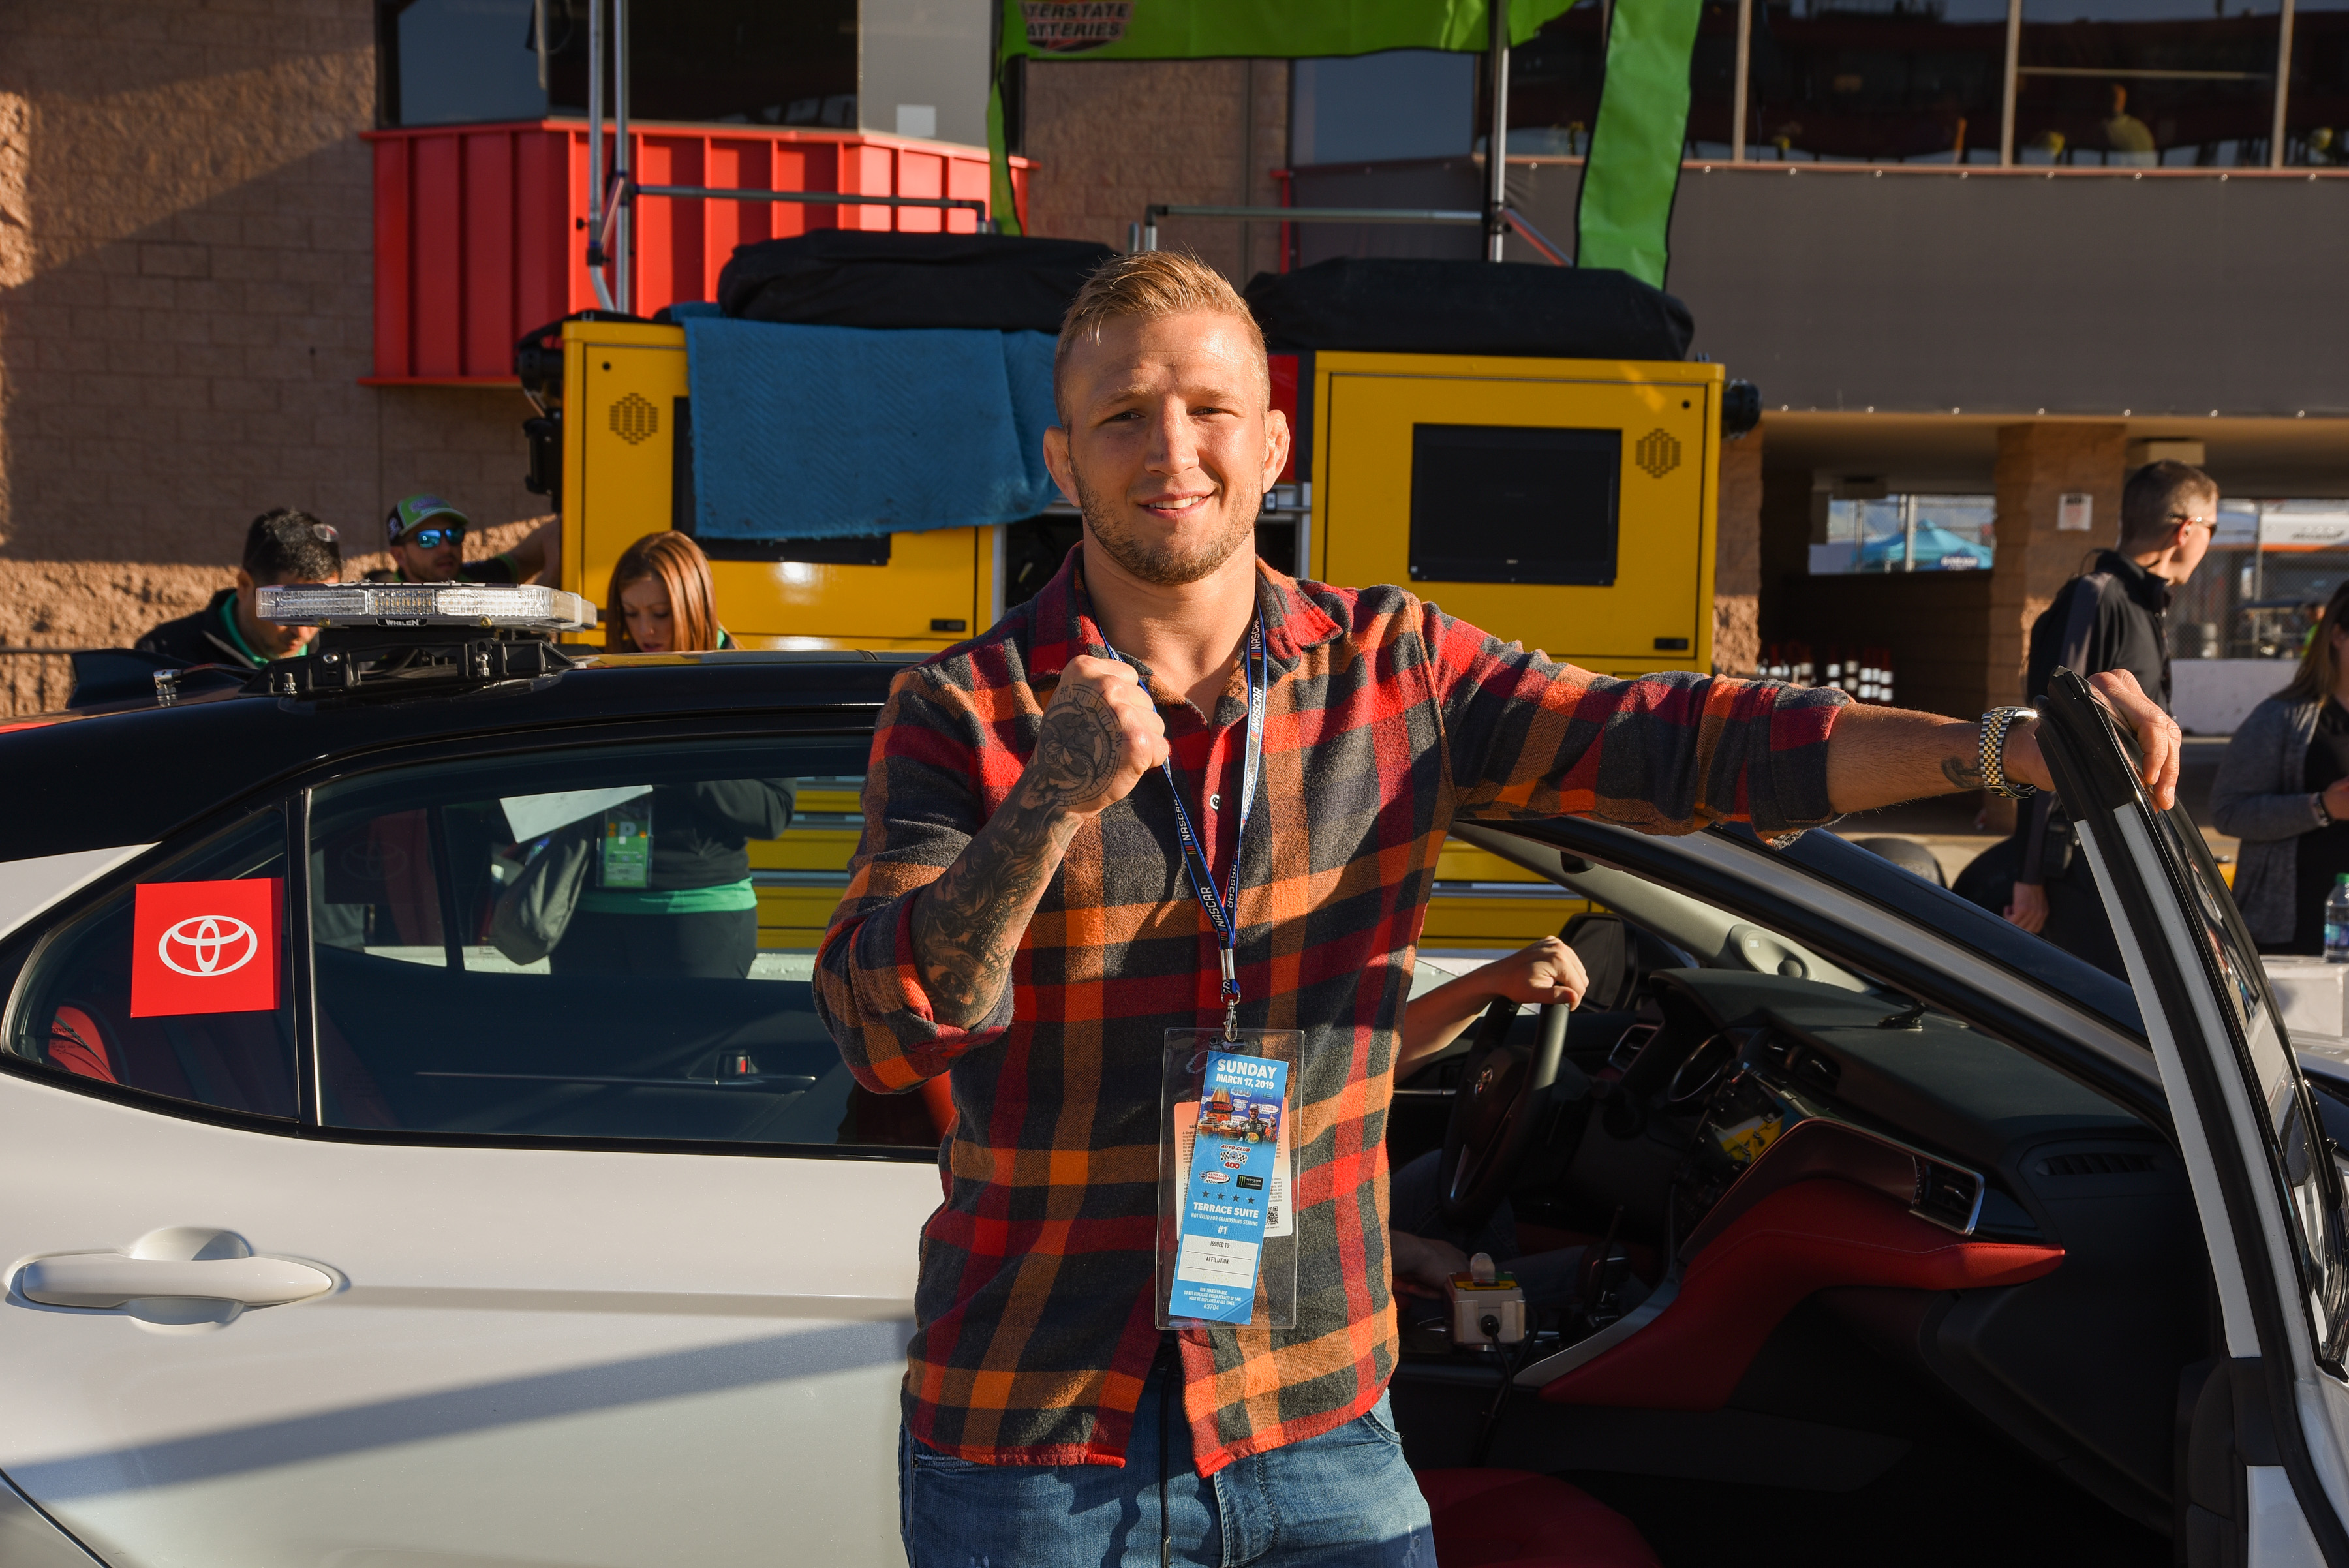 T.J. Dillashaw attends the 2019 Monster Energy NASCAR Cup Series race